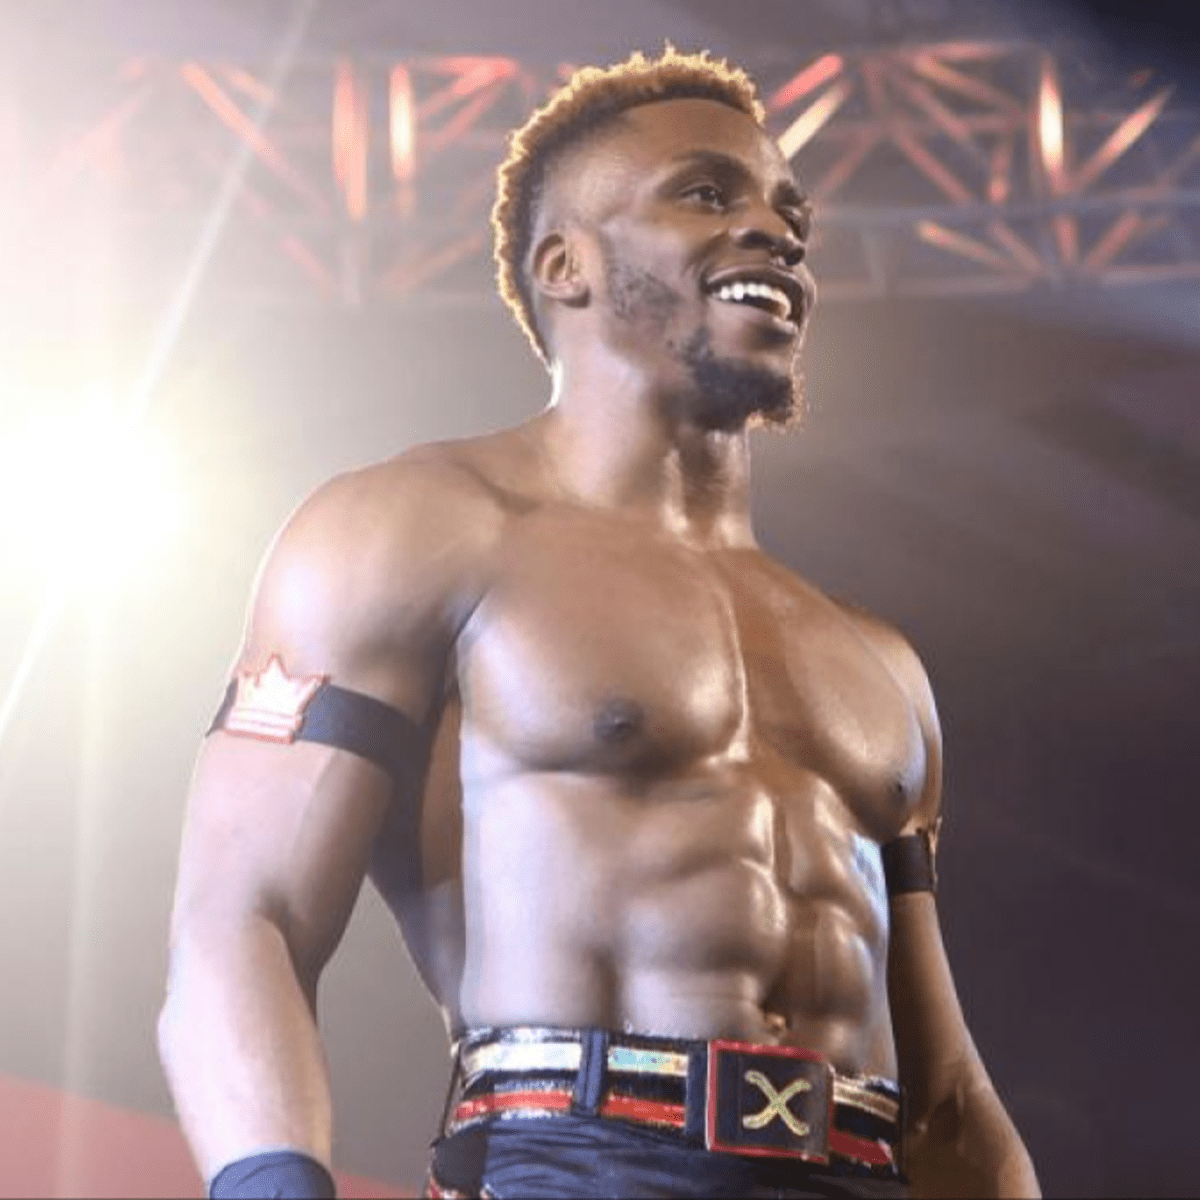 Edris Enofe is planning to get a neck tattoo of NXT logo after WWE chest  tattoo - Wrestling News | WWE and AEW Results, Spoilers, Rumors & Scoops